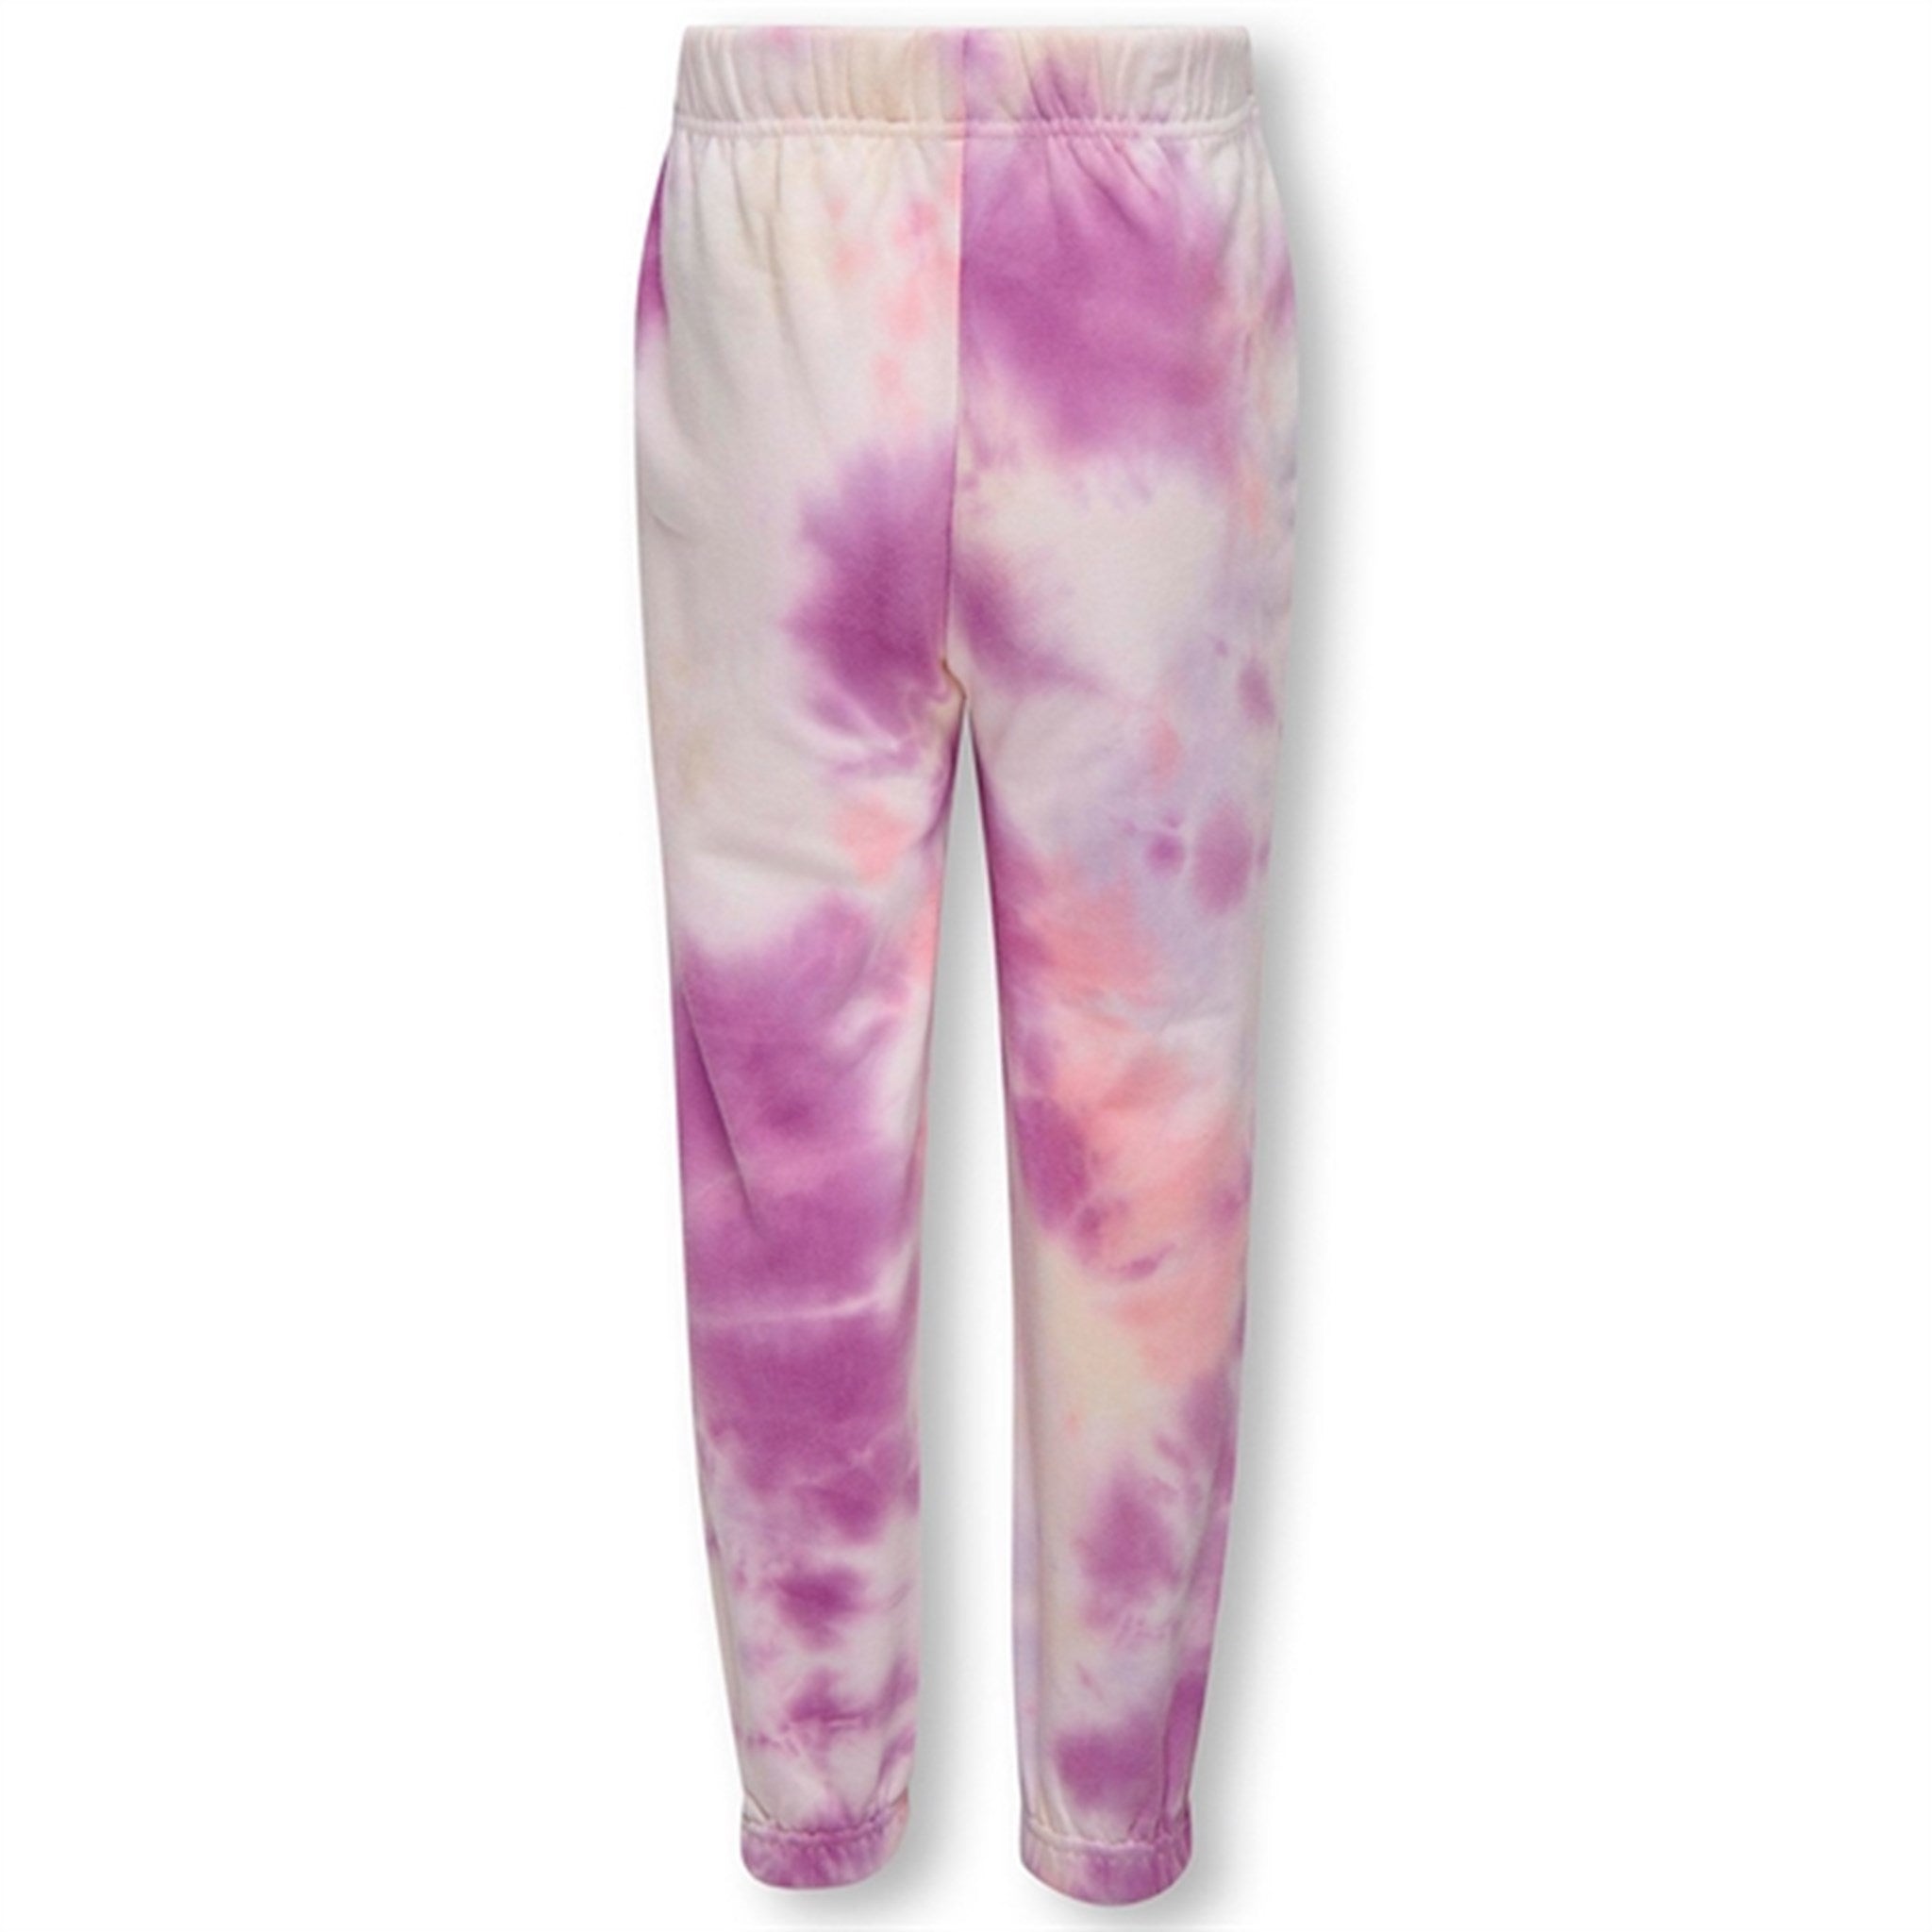 Kids ONLY Purple Rose Never pull-up Tie Dye Sweatpants 2